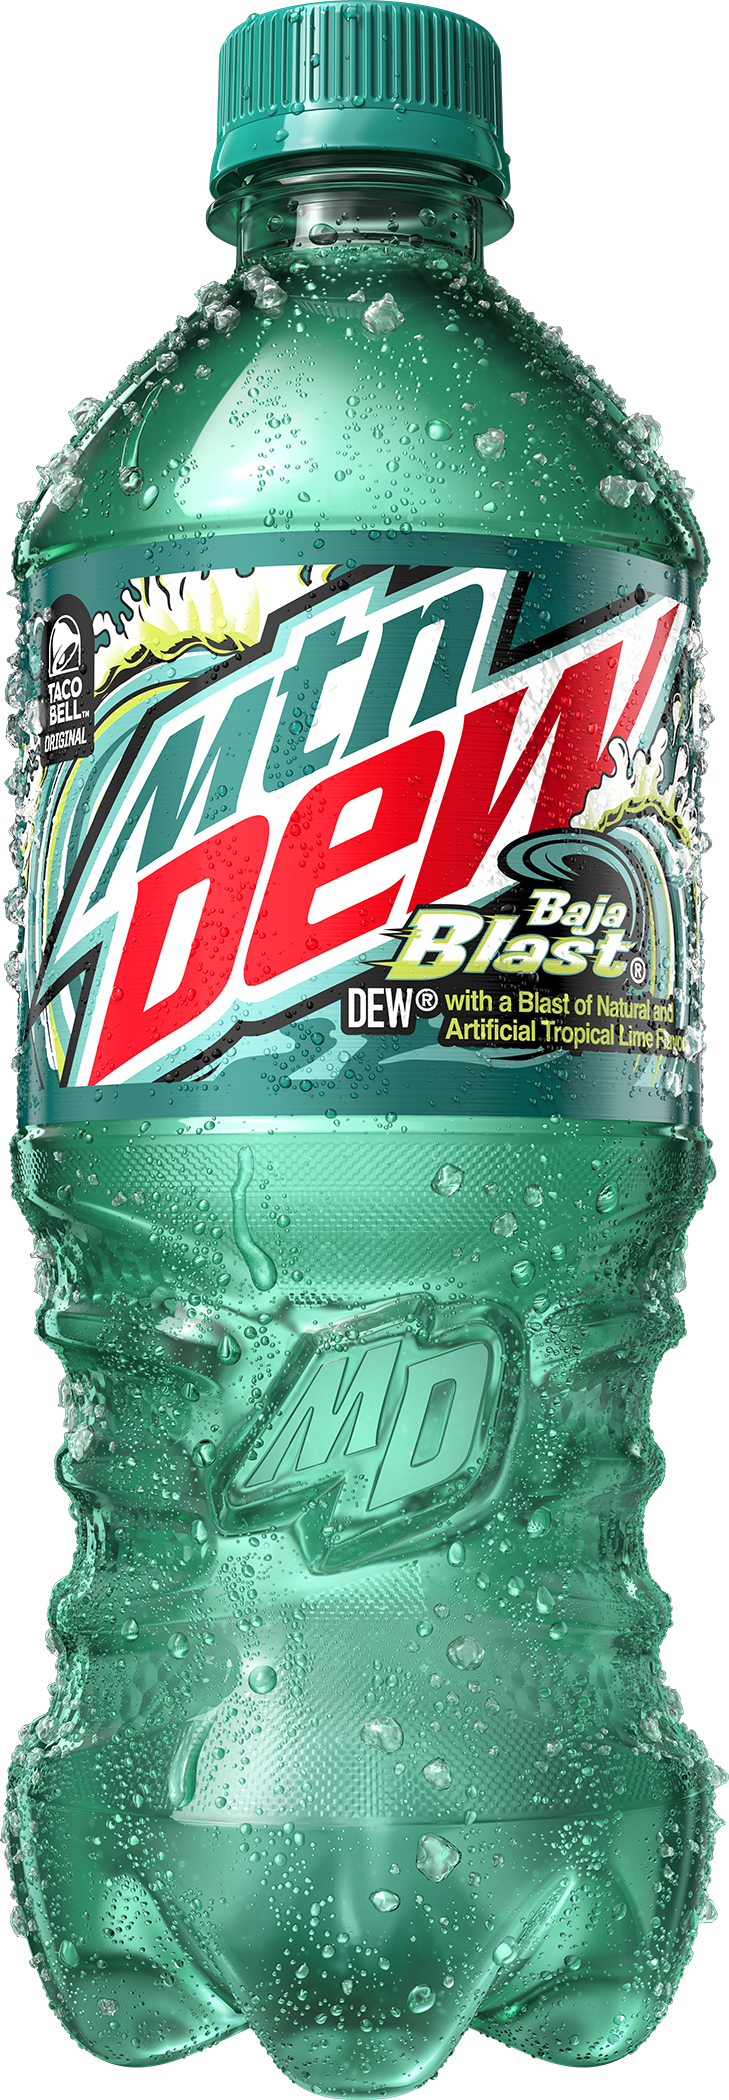 Mountain Dew Baja Blast bottle, a Honickman Companies product from the New York Pepsi location